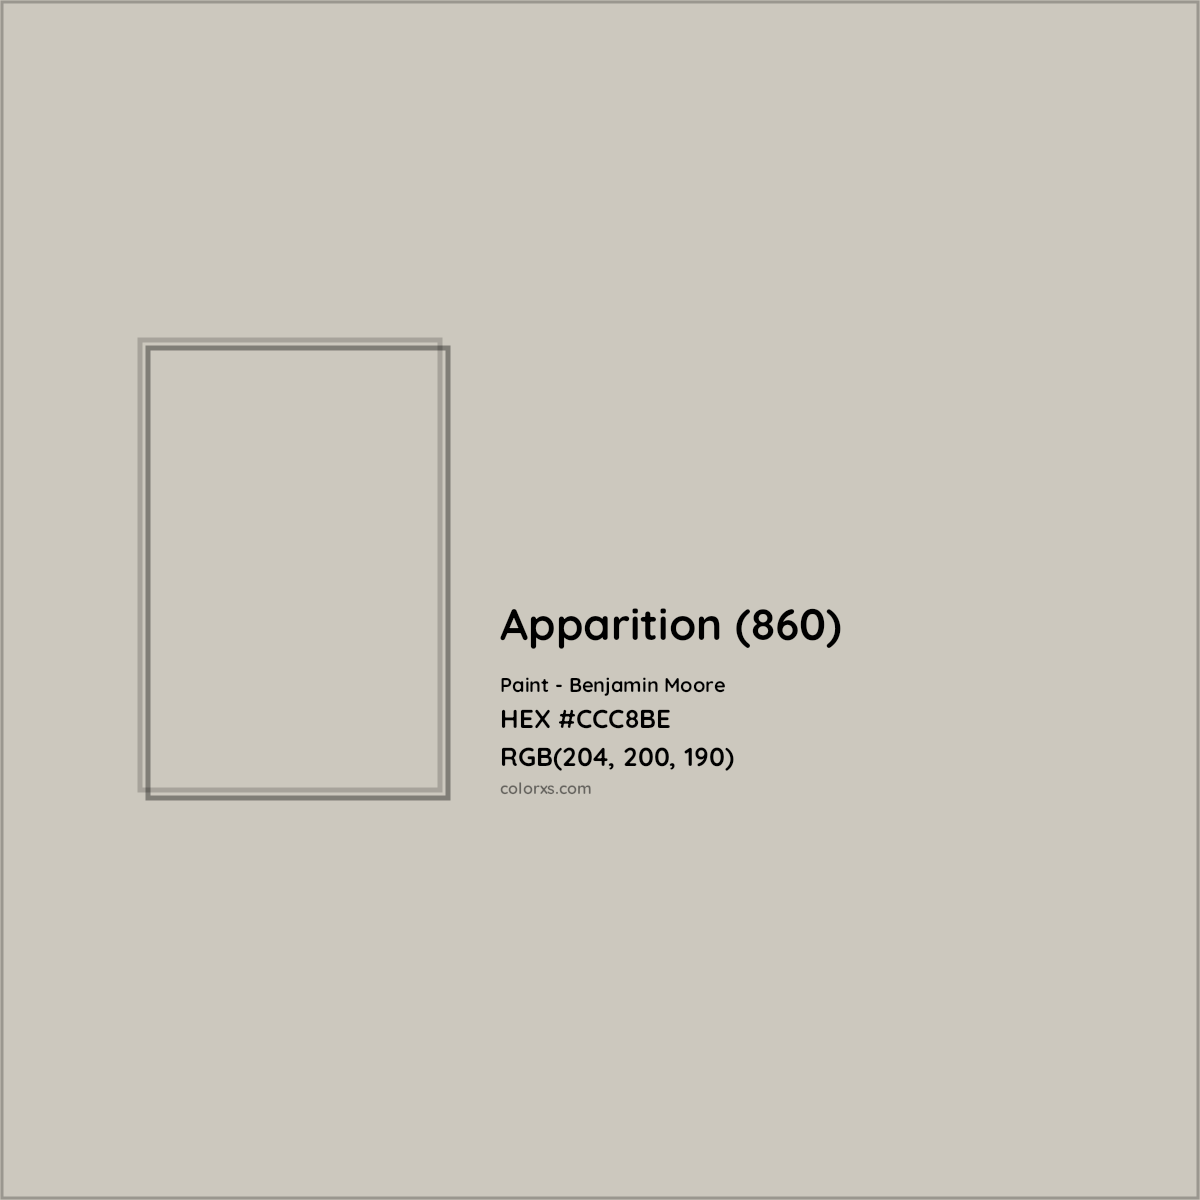 HEX #CCC8BE Apparition (860) Paint Benjamin Moore - Color Code